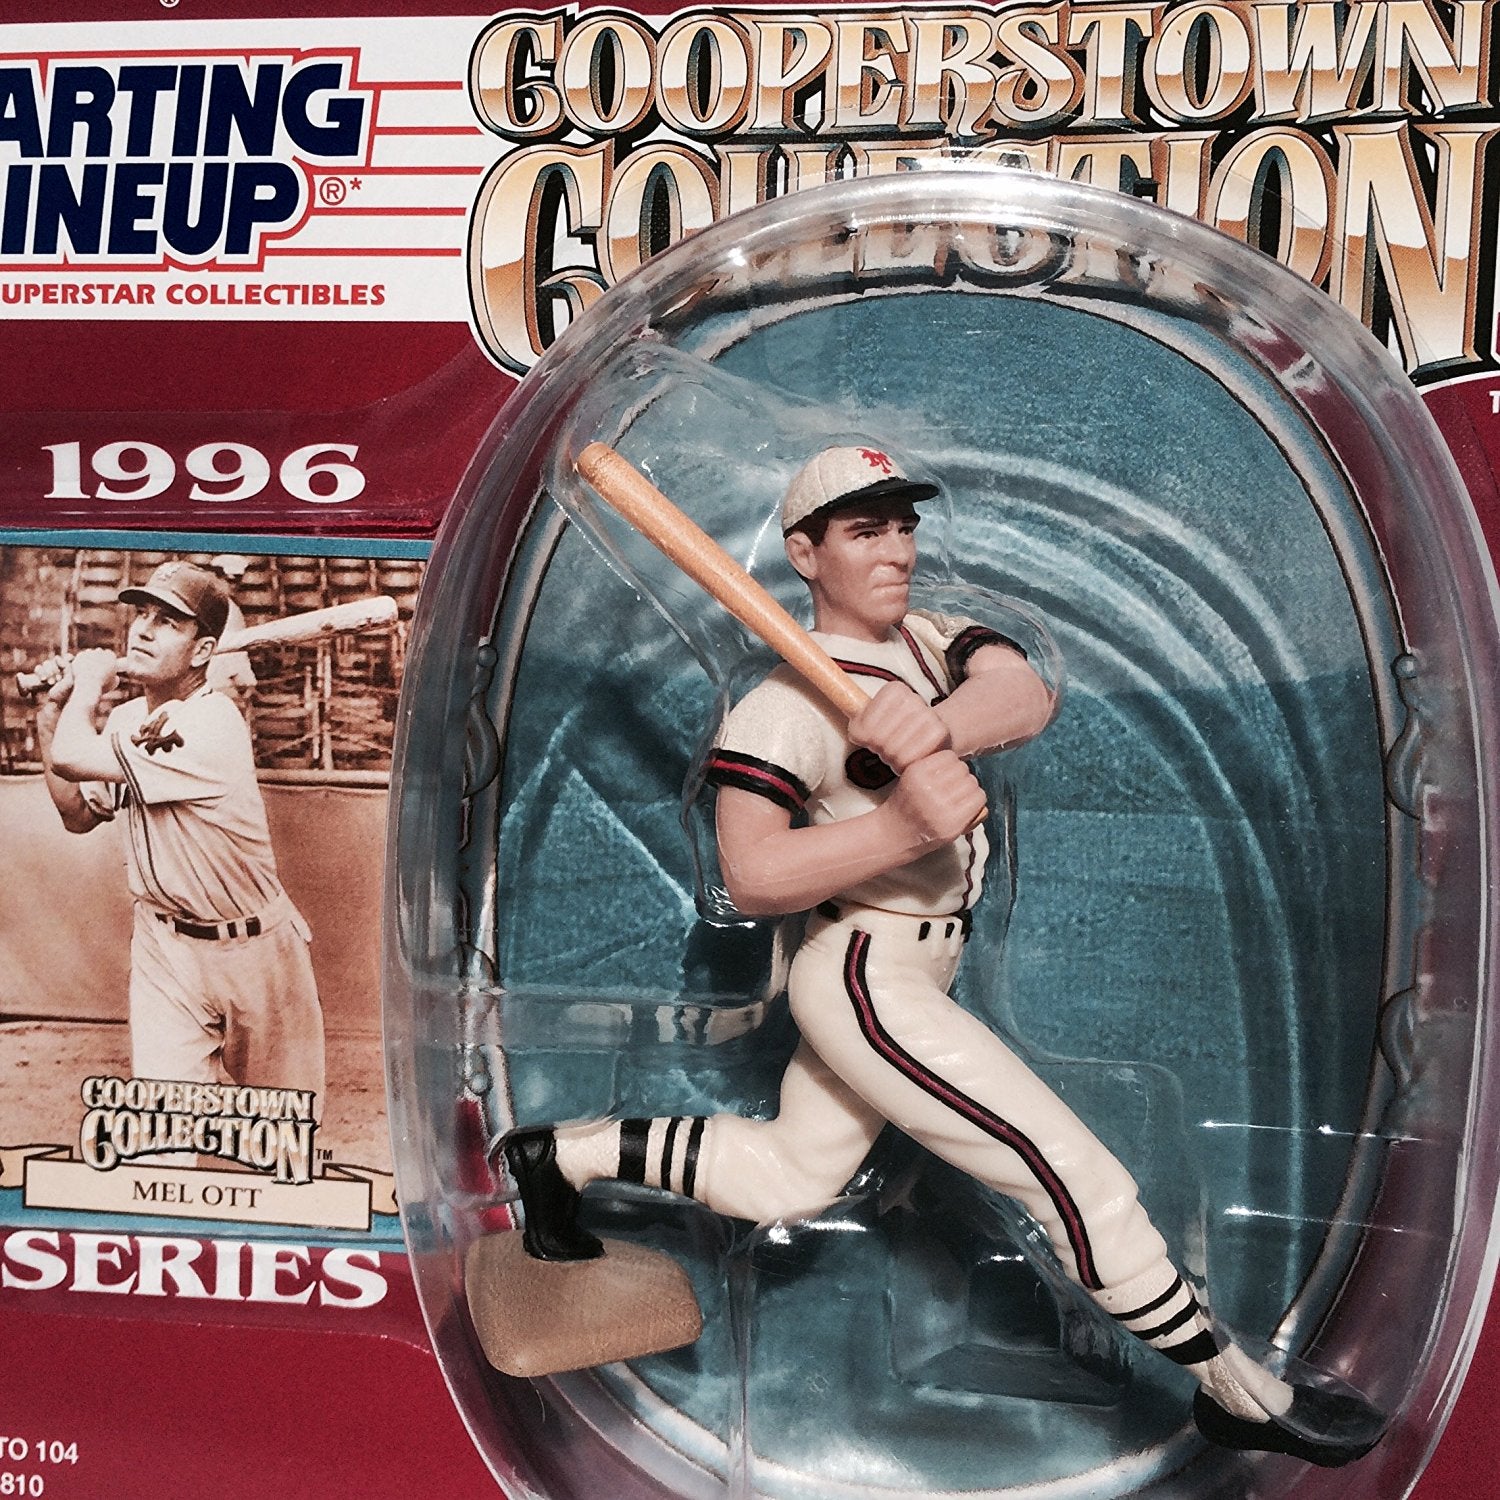 Starting Lineup - 1995 - MLB - Copperstown Collection - Mel Ott Action Figure - 1996 Series - Out of Production - Limited Edition - Collectible